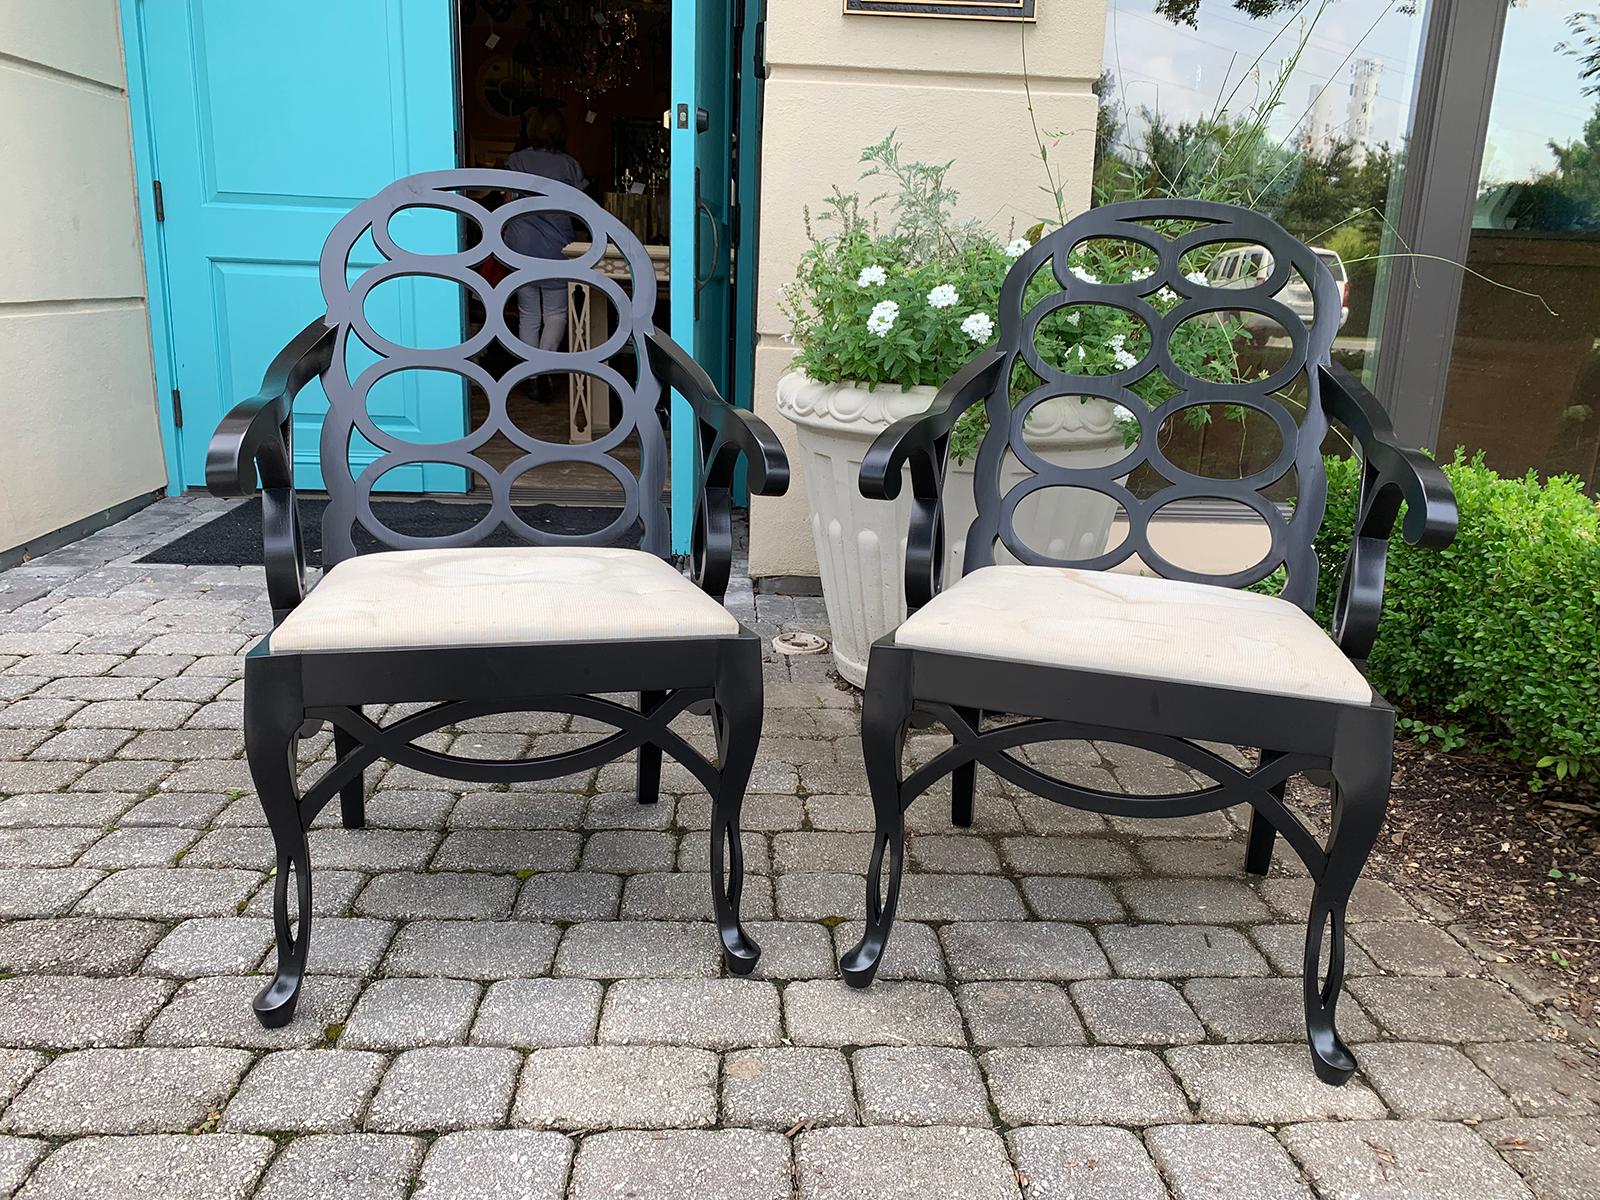 Pair of 20th century lacquered loop armchairs in the style of Frances Elkins
black satin
Measures: 24